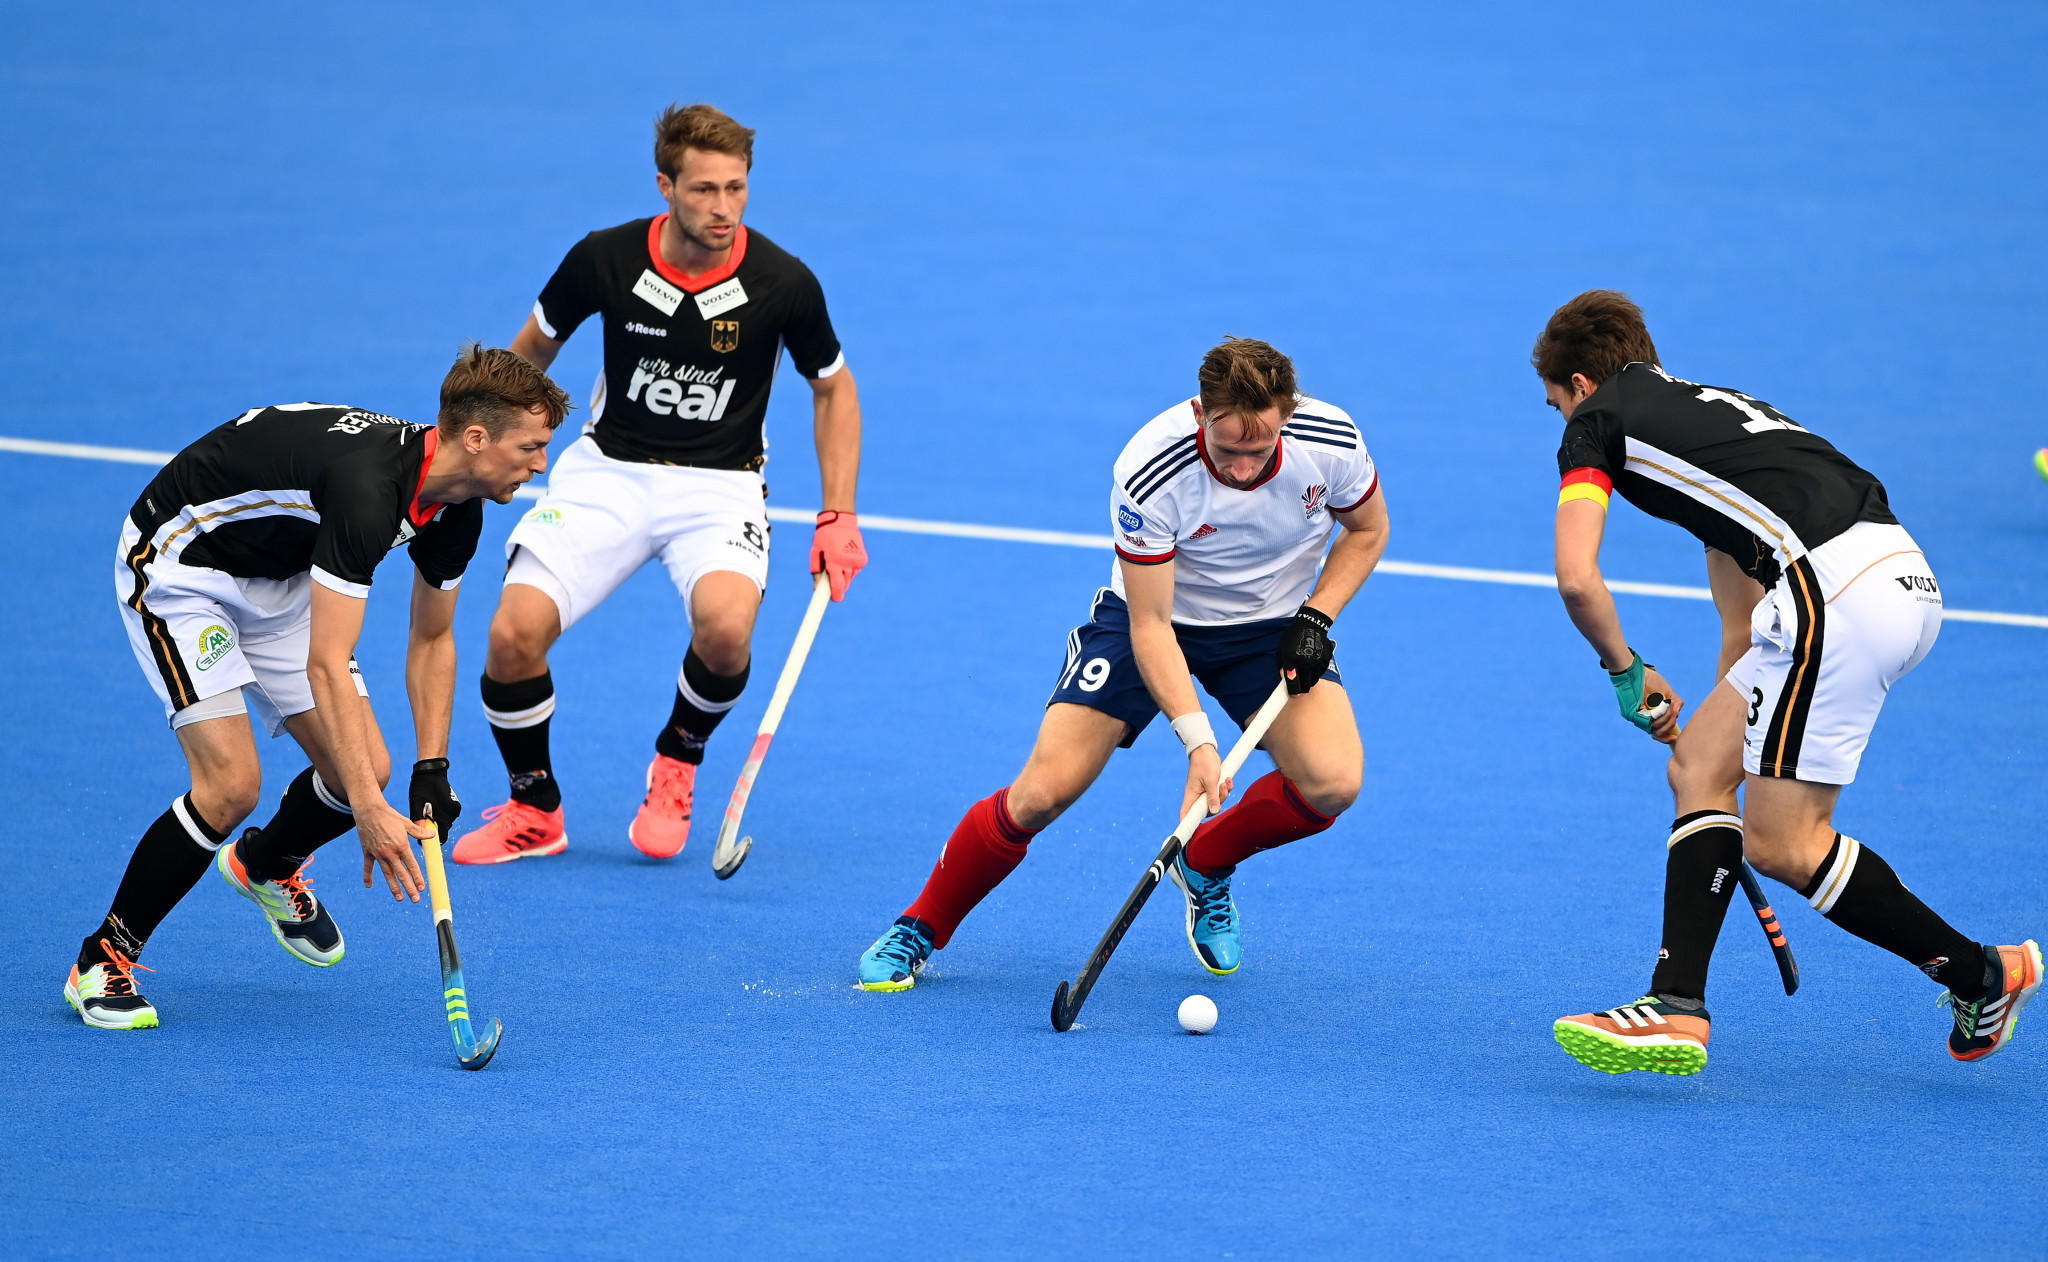 Britain claim double success against Germany in latest FIH Pro League matches